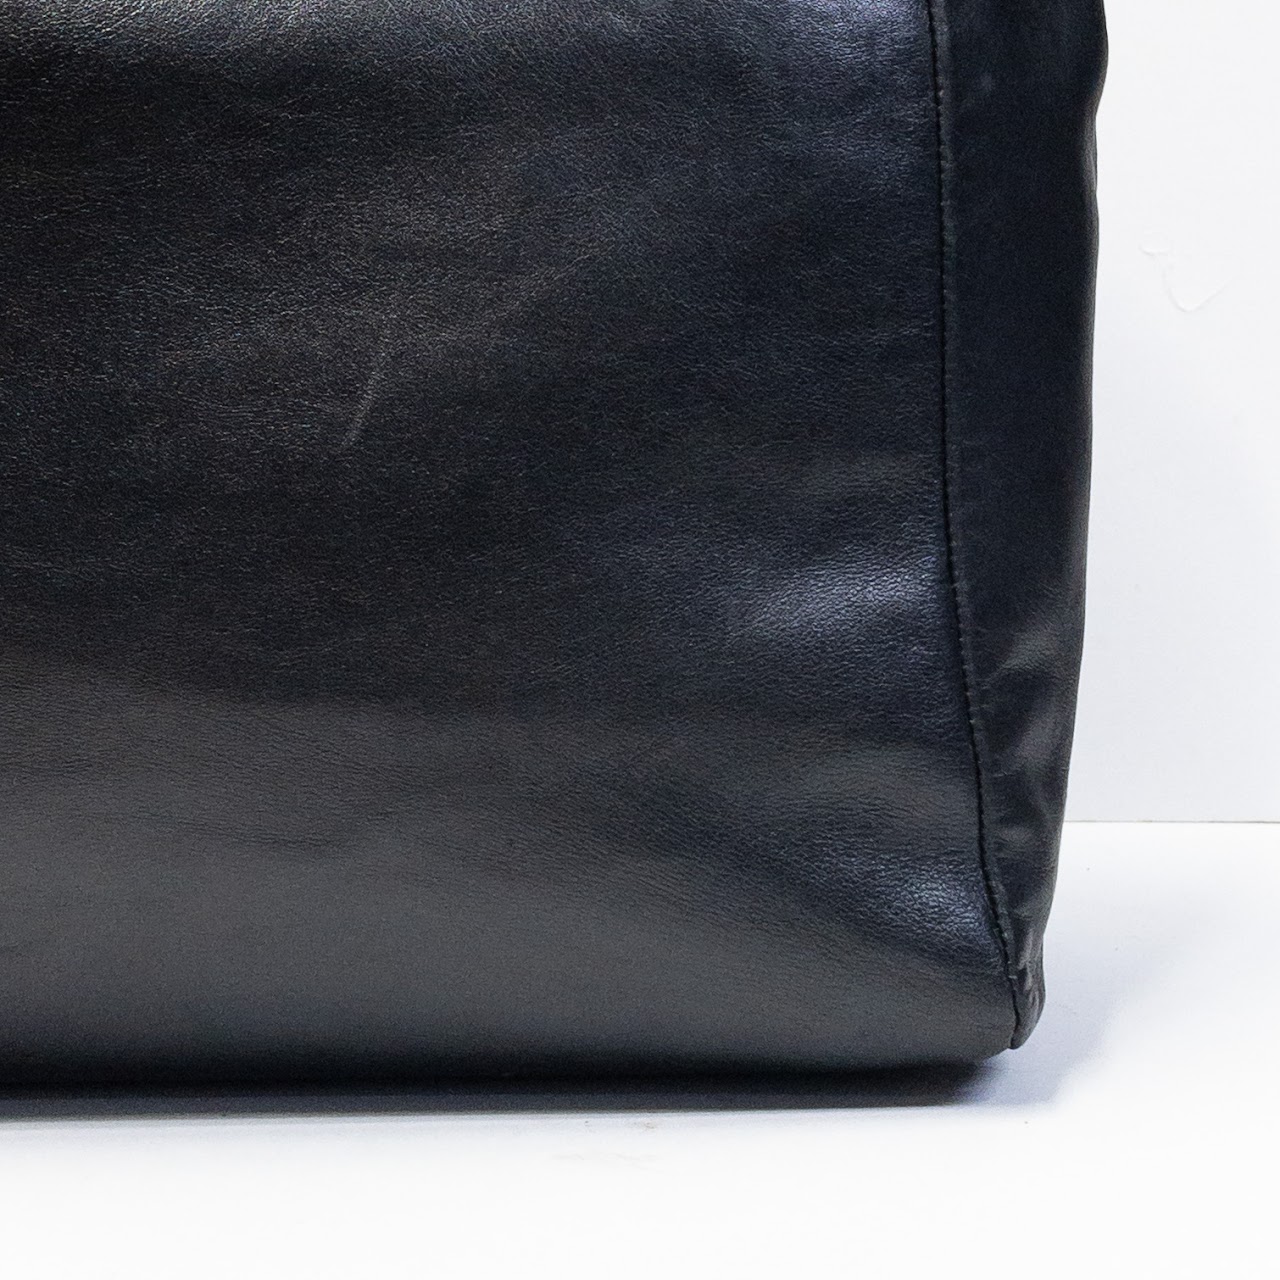 Saint Laurent Reversible Leather and Suede Tote